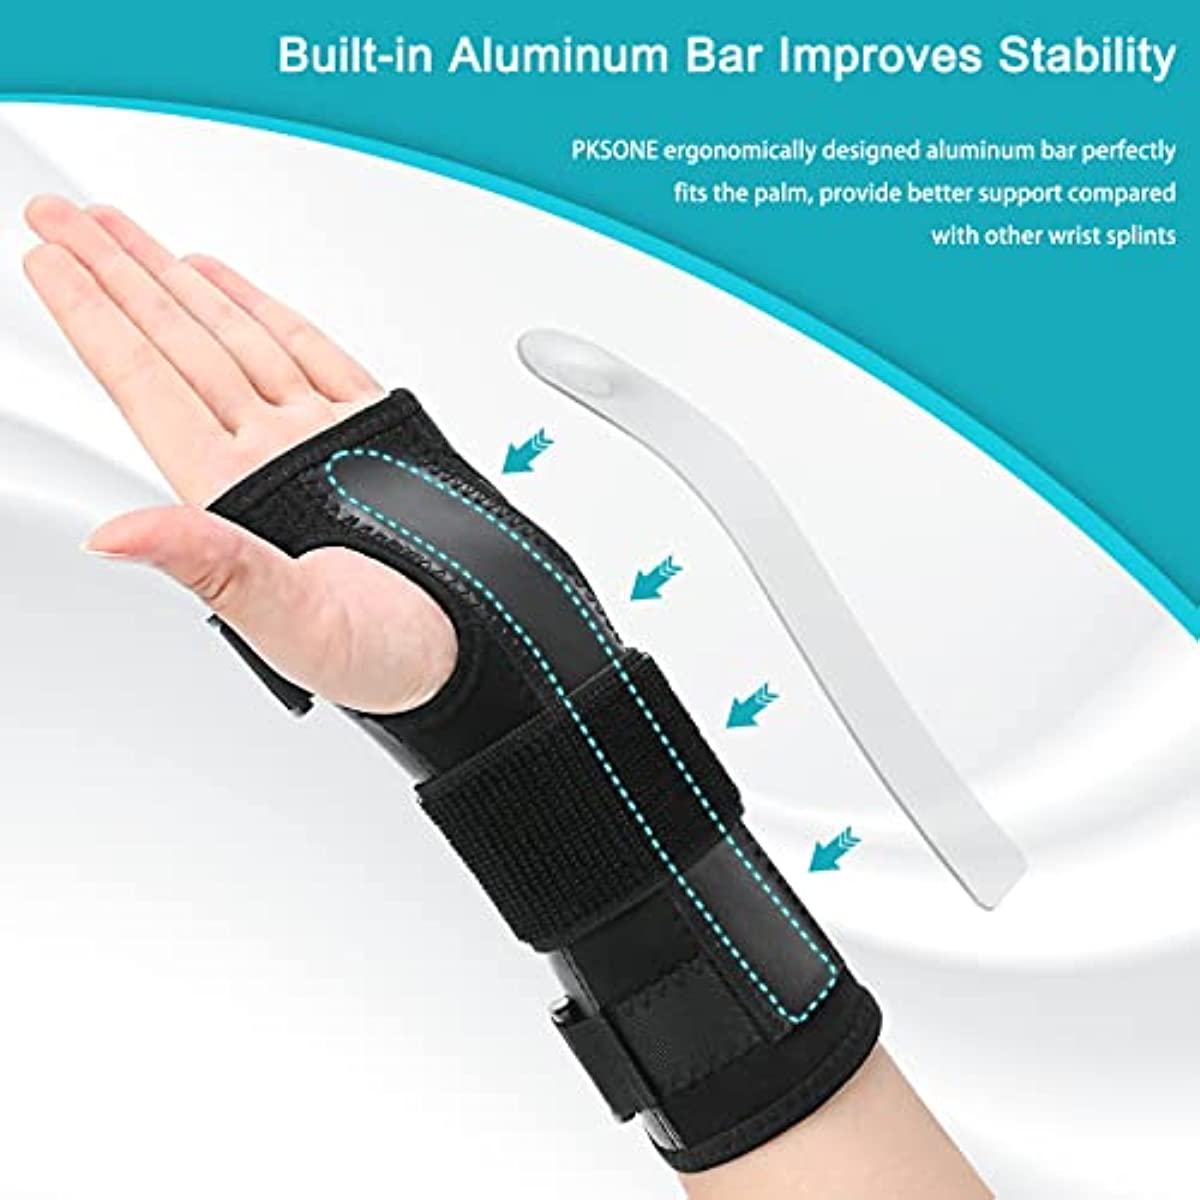 Wrist Splint for Carpal-Tunnel Syndrome by PKSTONE, Adjustable Compression Wrist Brace for Right and Left Hand, Pain Relief for Arthritis, Tendonitis, Sprains